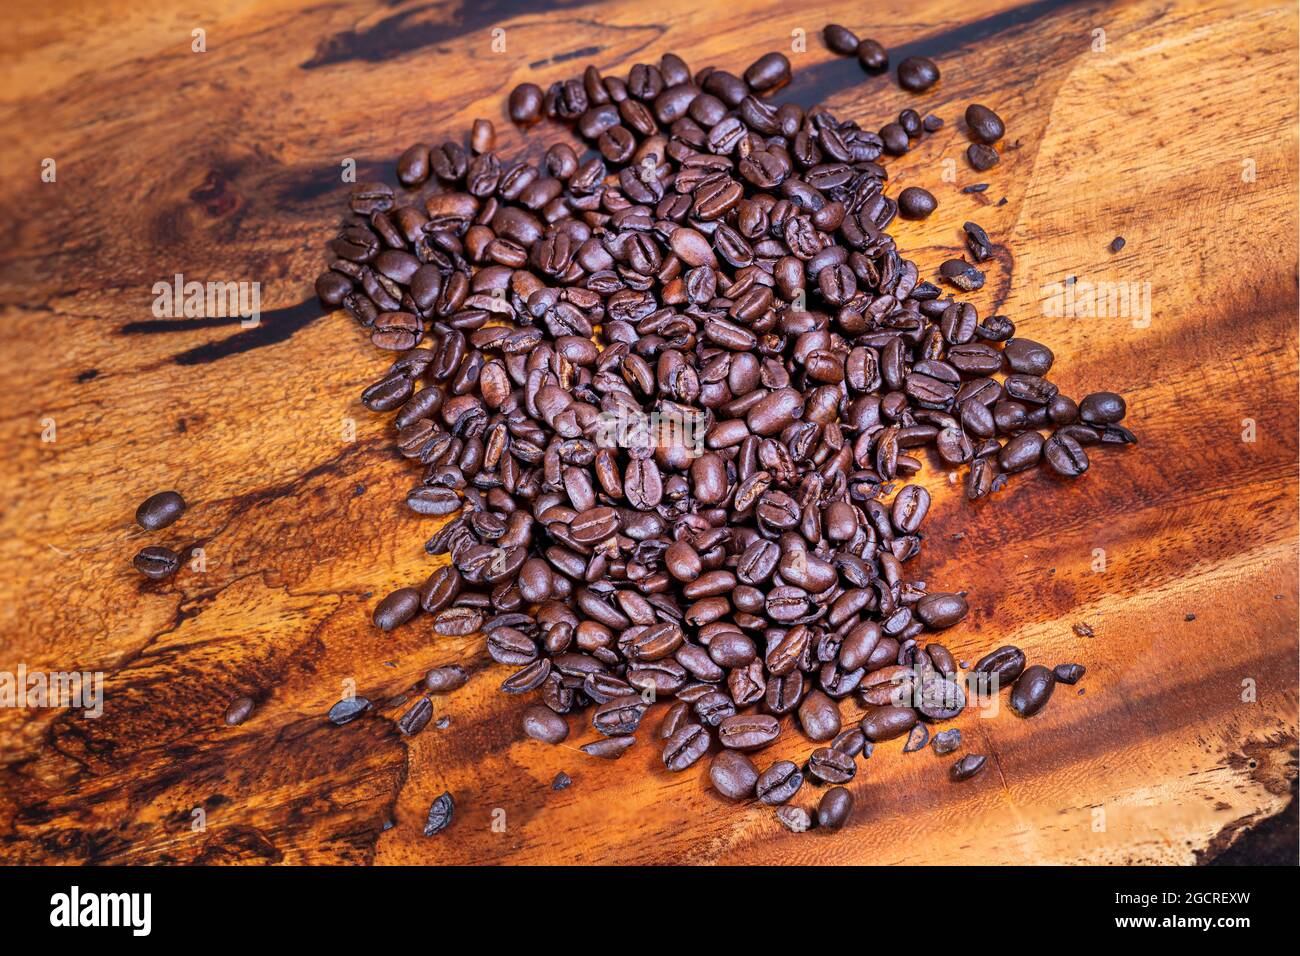 https://c8.alamy.com/comp/2GCREXW/macro-photography-top-view-of-a-heap-fresh-roasted-coffee-beans-on-a-wooden-background-high-resolution-detailed-close-up-of-brown-roasted-coffee-bean-2GCREXW.jpg